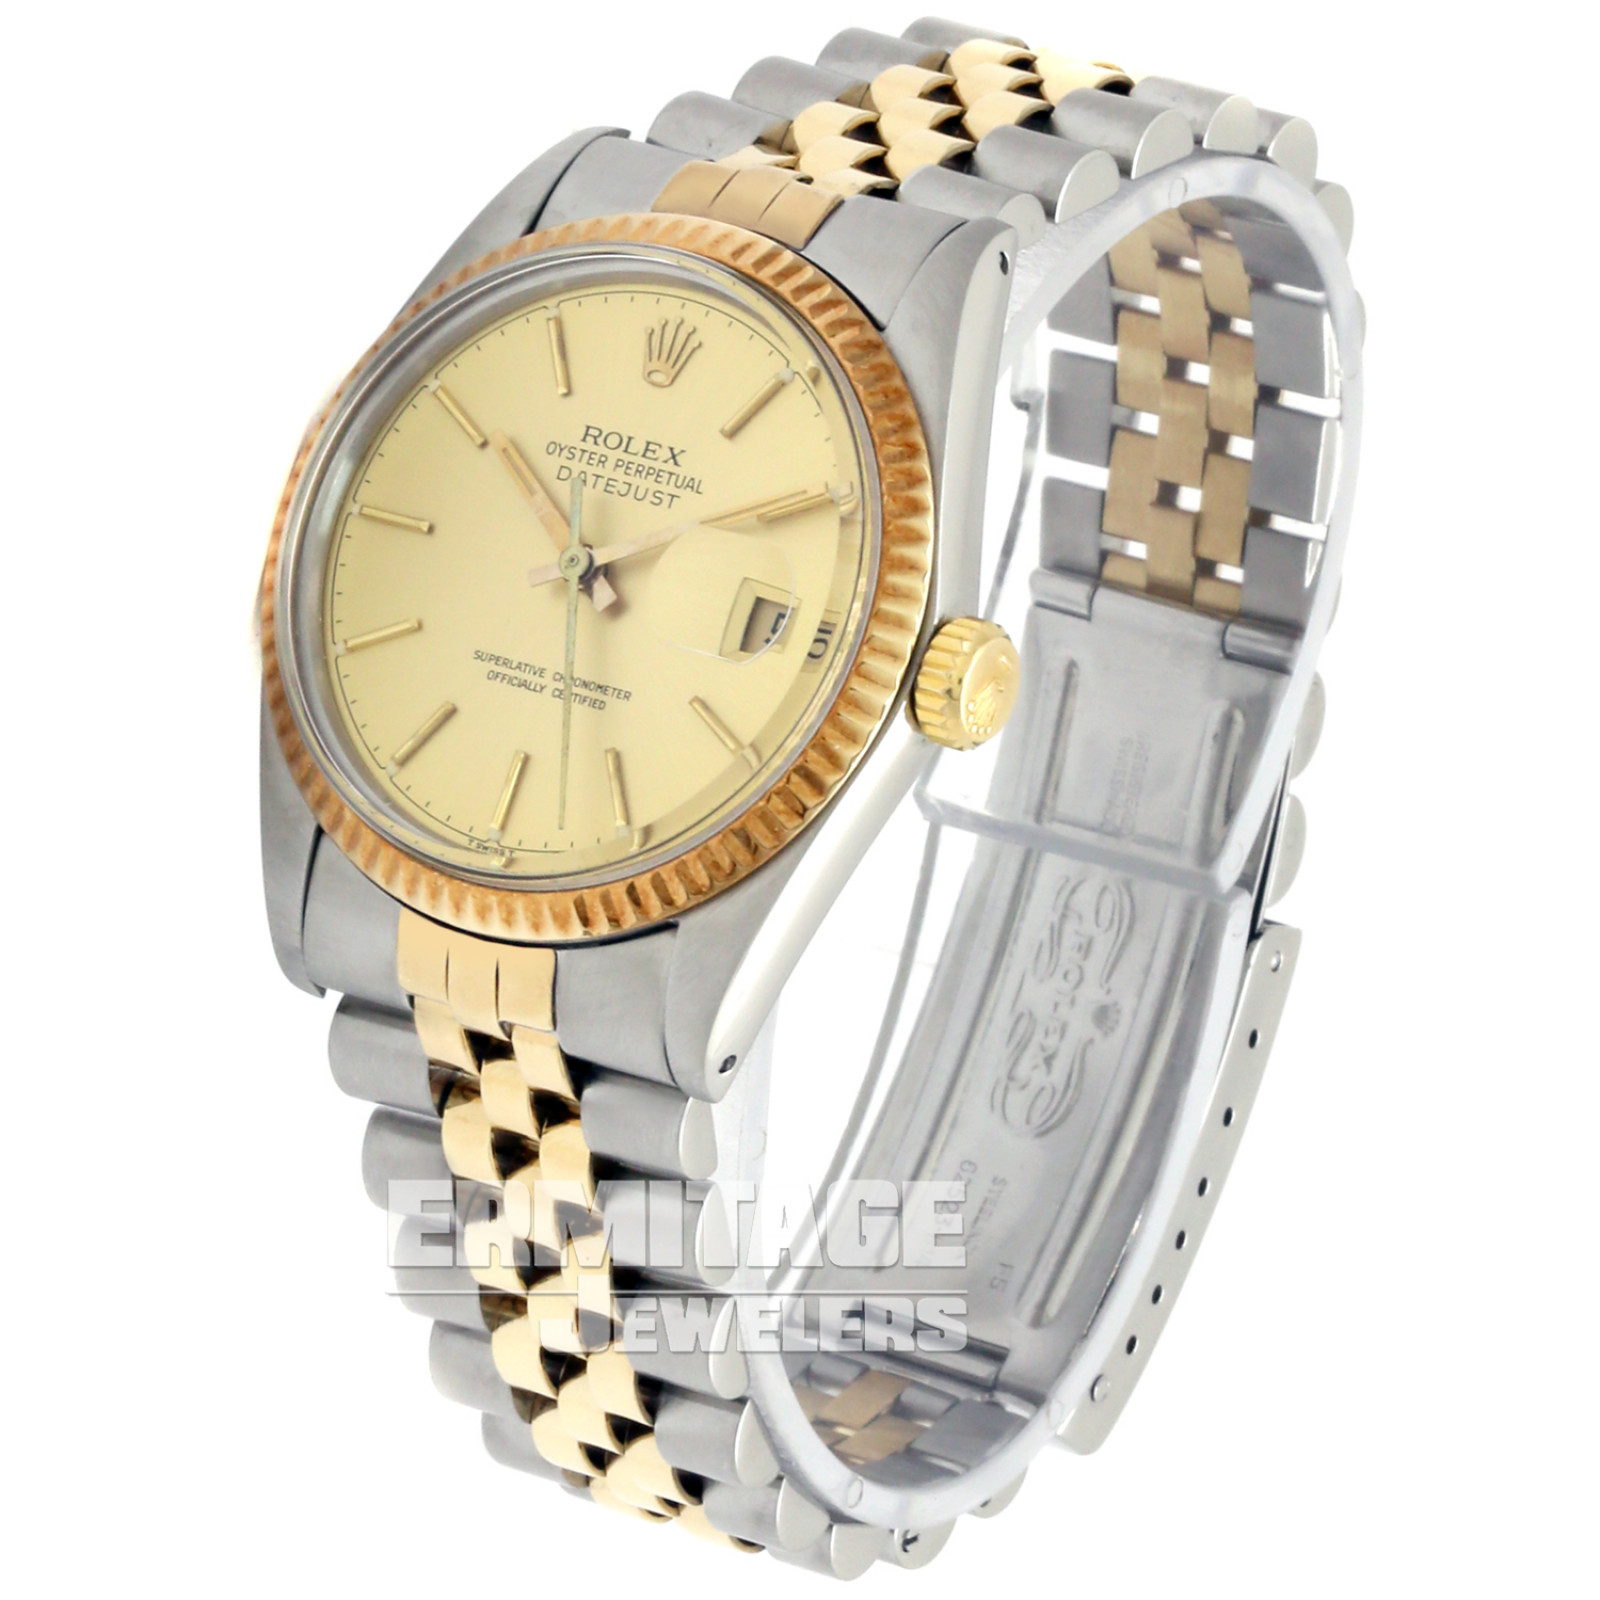 Rolex Datejust 16013 with Champagne Dial